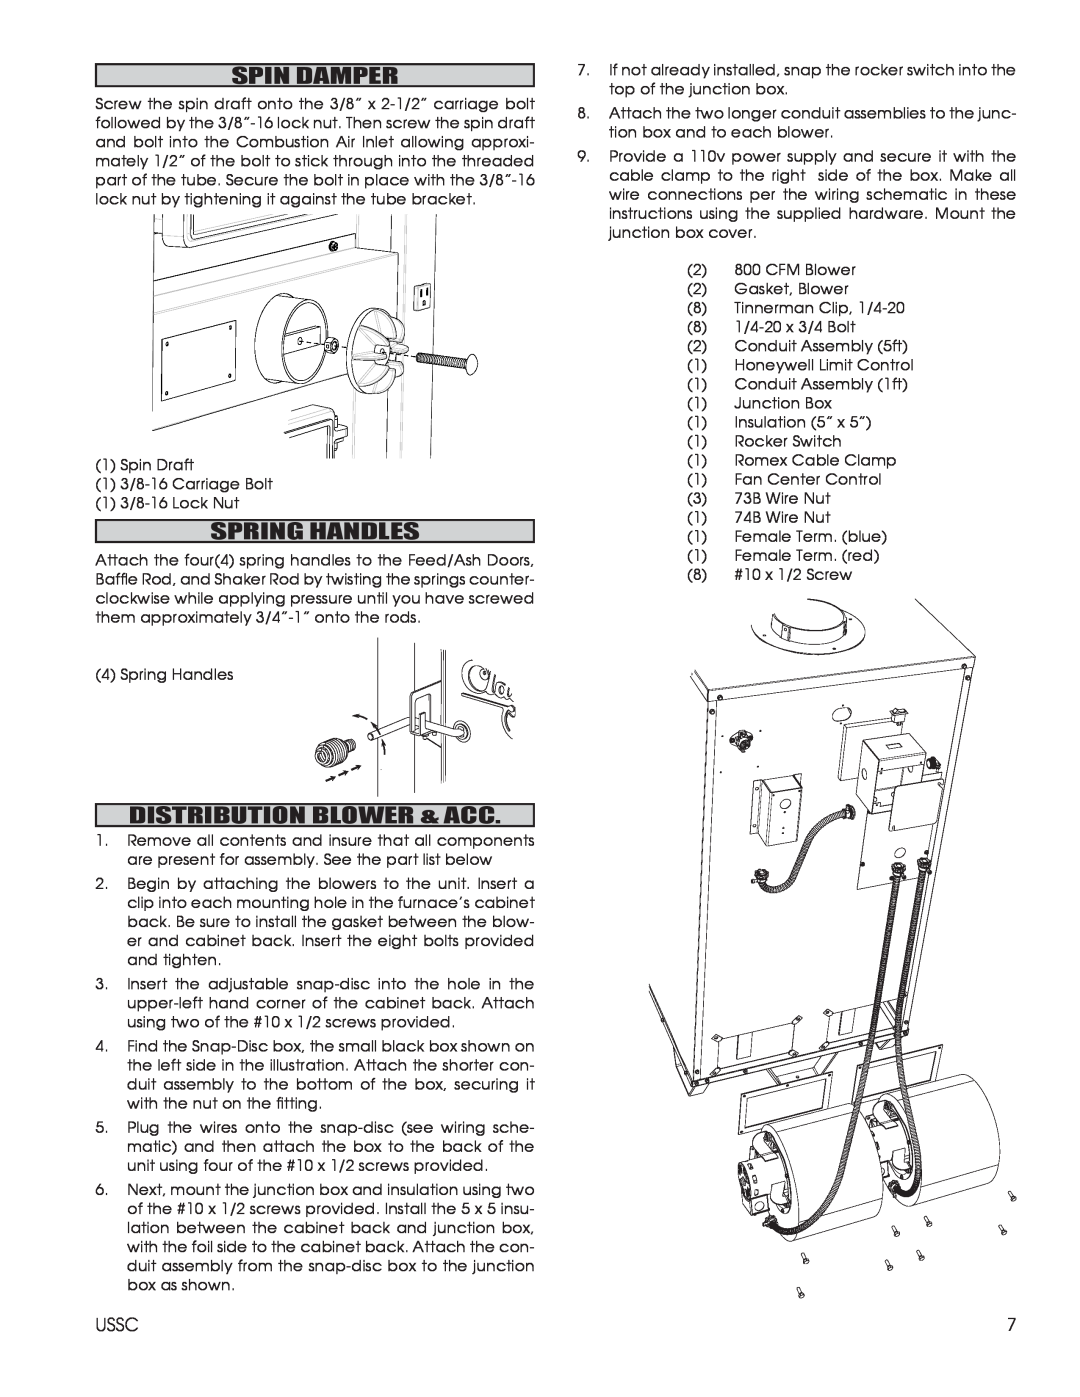 United States Stove 1602M installation instructions Spin Damper, Spring Handles, Distribution Blower & Acc, Ussc 